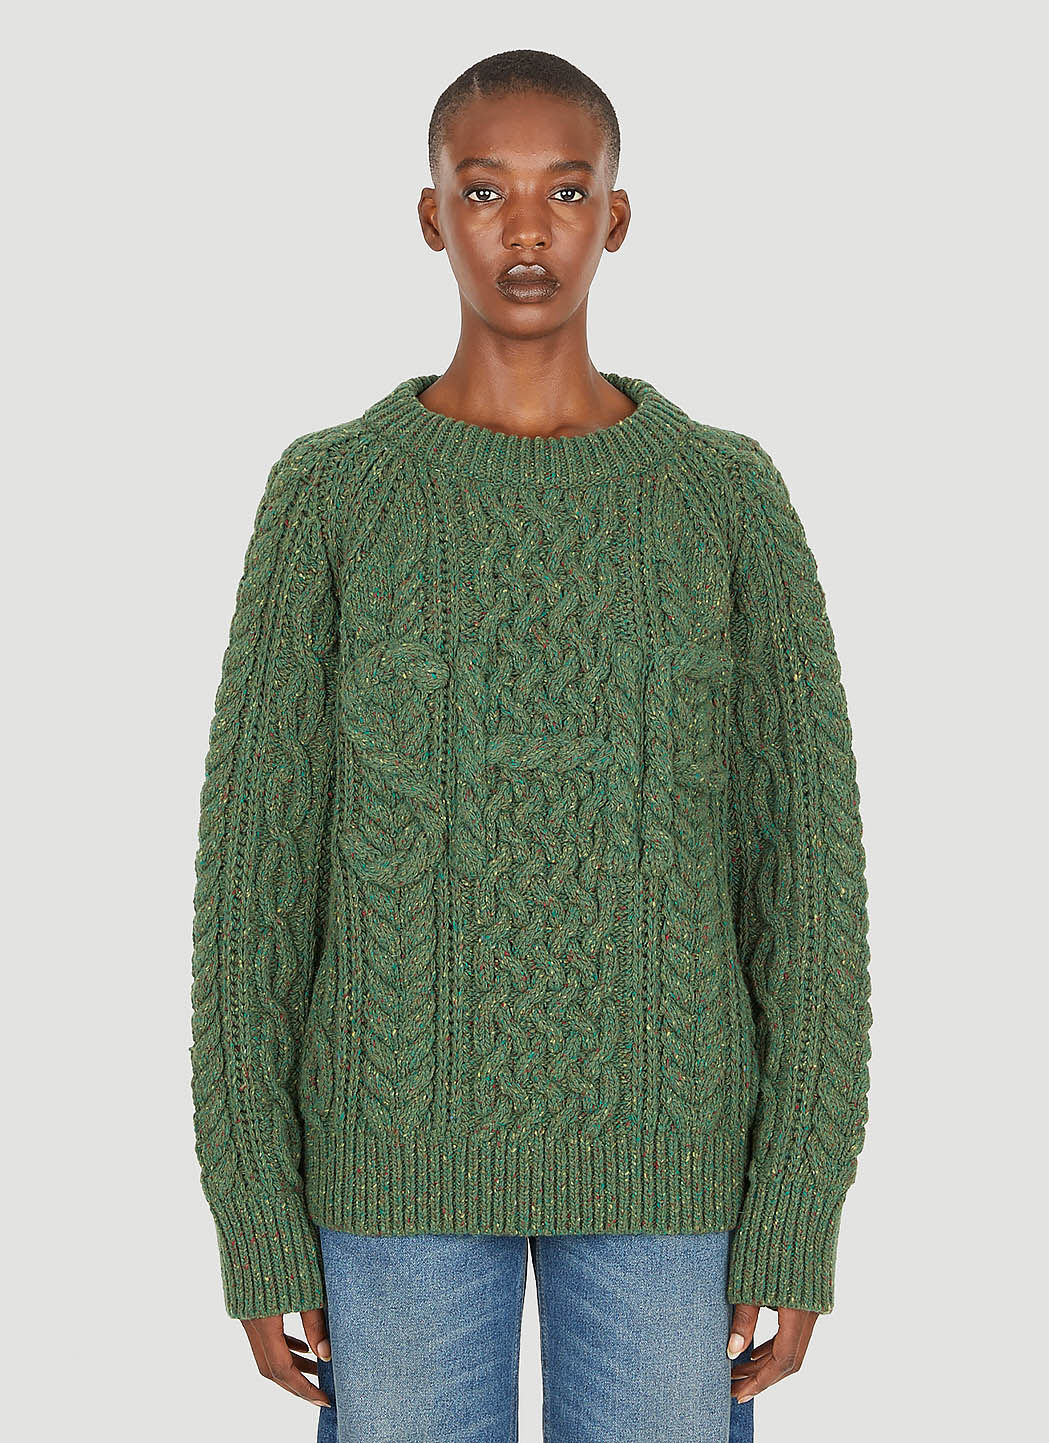 Burberry Cable Knit Sweater Brown bur0249018